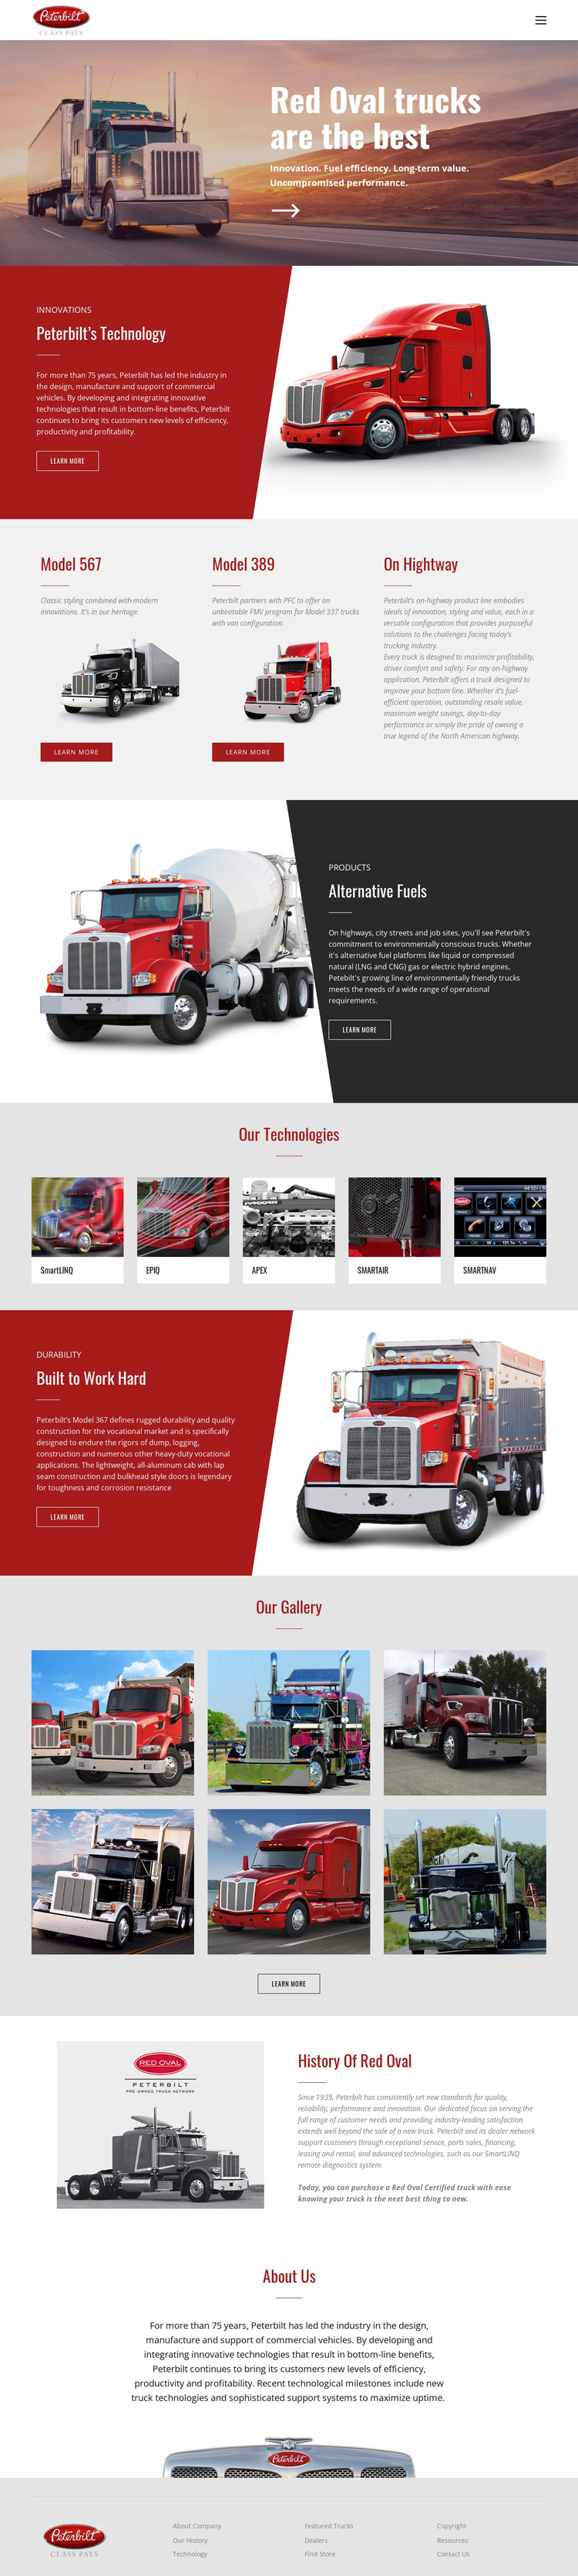 Red oval truck transportaion Website Builder Software